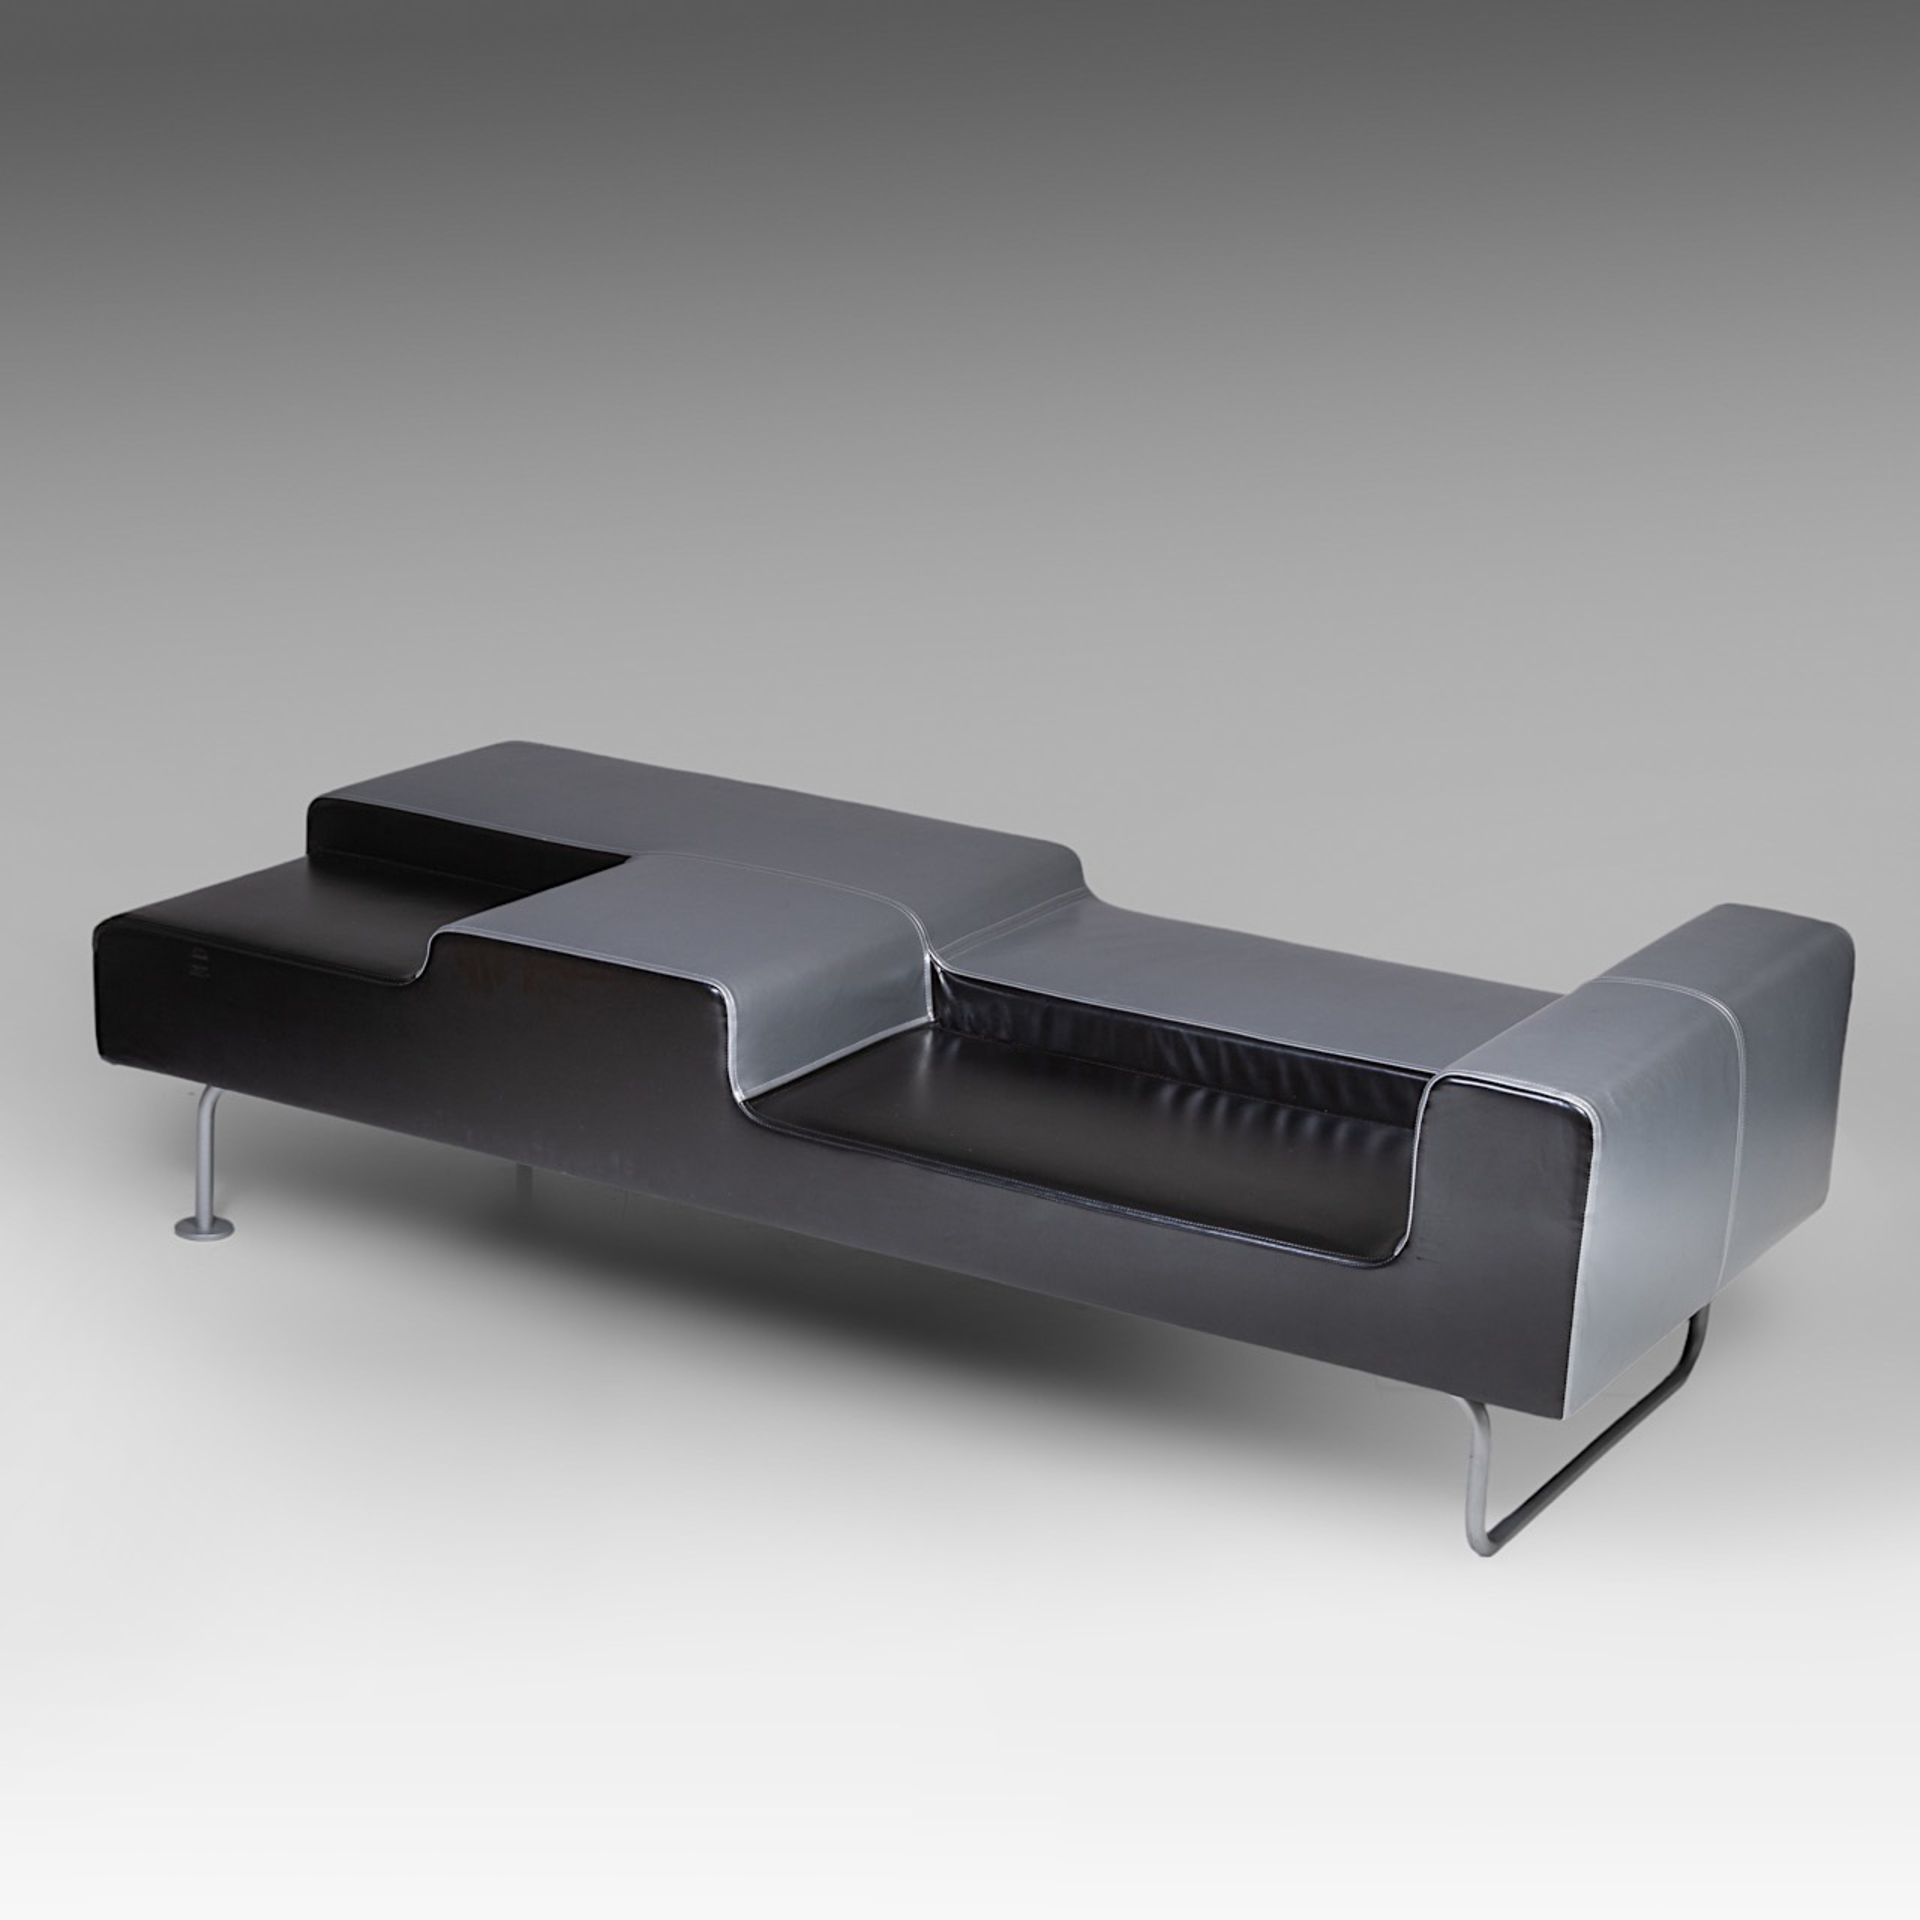 A daybed by Bruno La Mela for Antidiva, Italy, 2000, H 60 - W 212 - D 90 cm